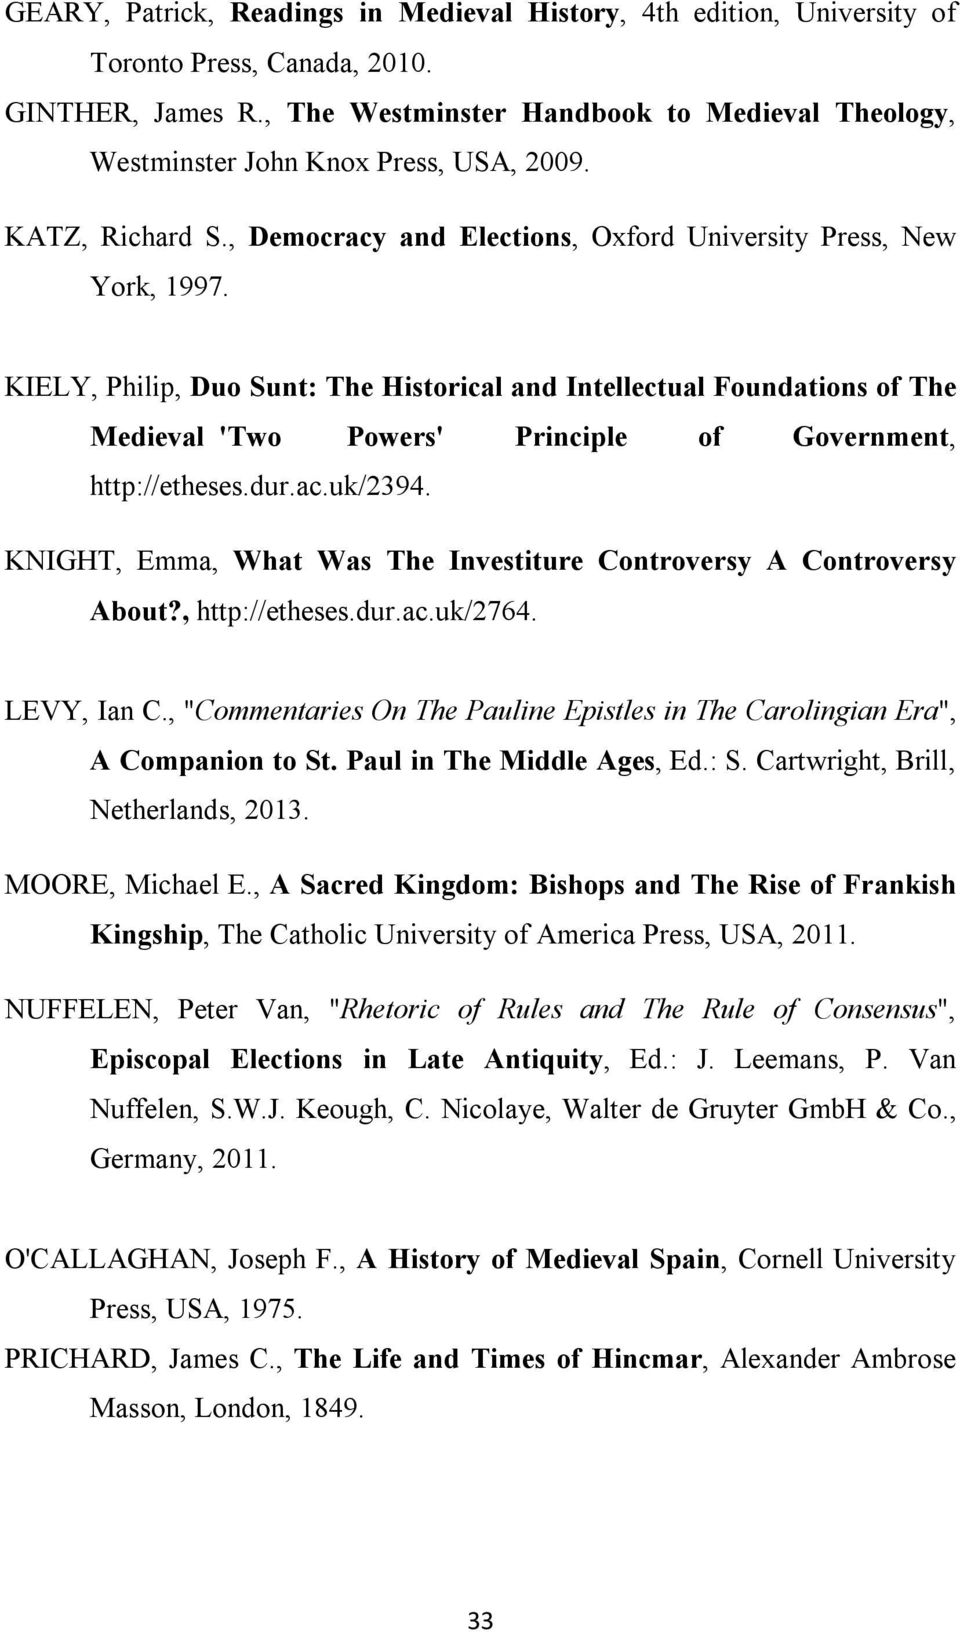 KIELY, Philip, Duo Sunt: The Historical and Intellectual Foundations of The Medieval 'Two Powers' Principle of Government, http://etheses.dur.ac.uk/2394.